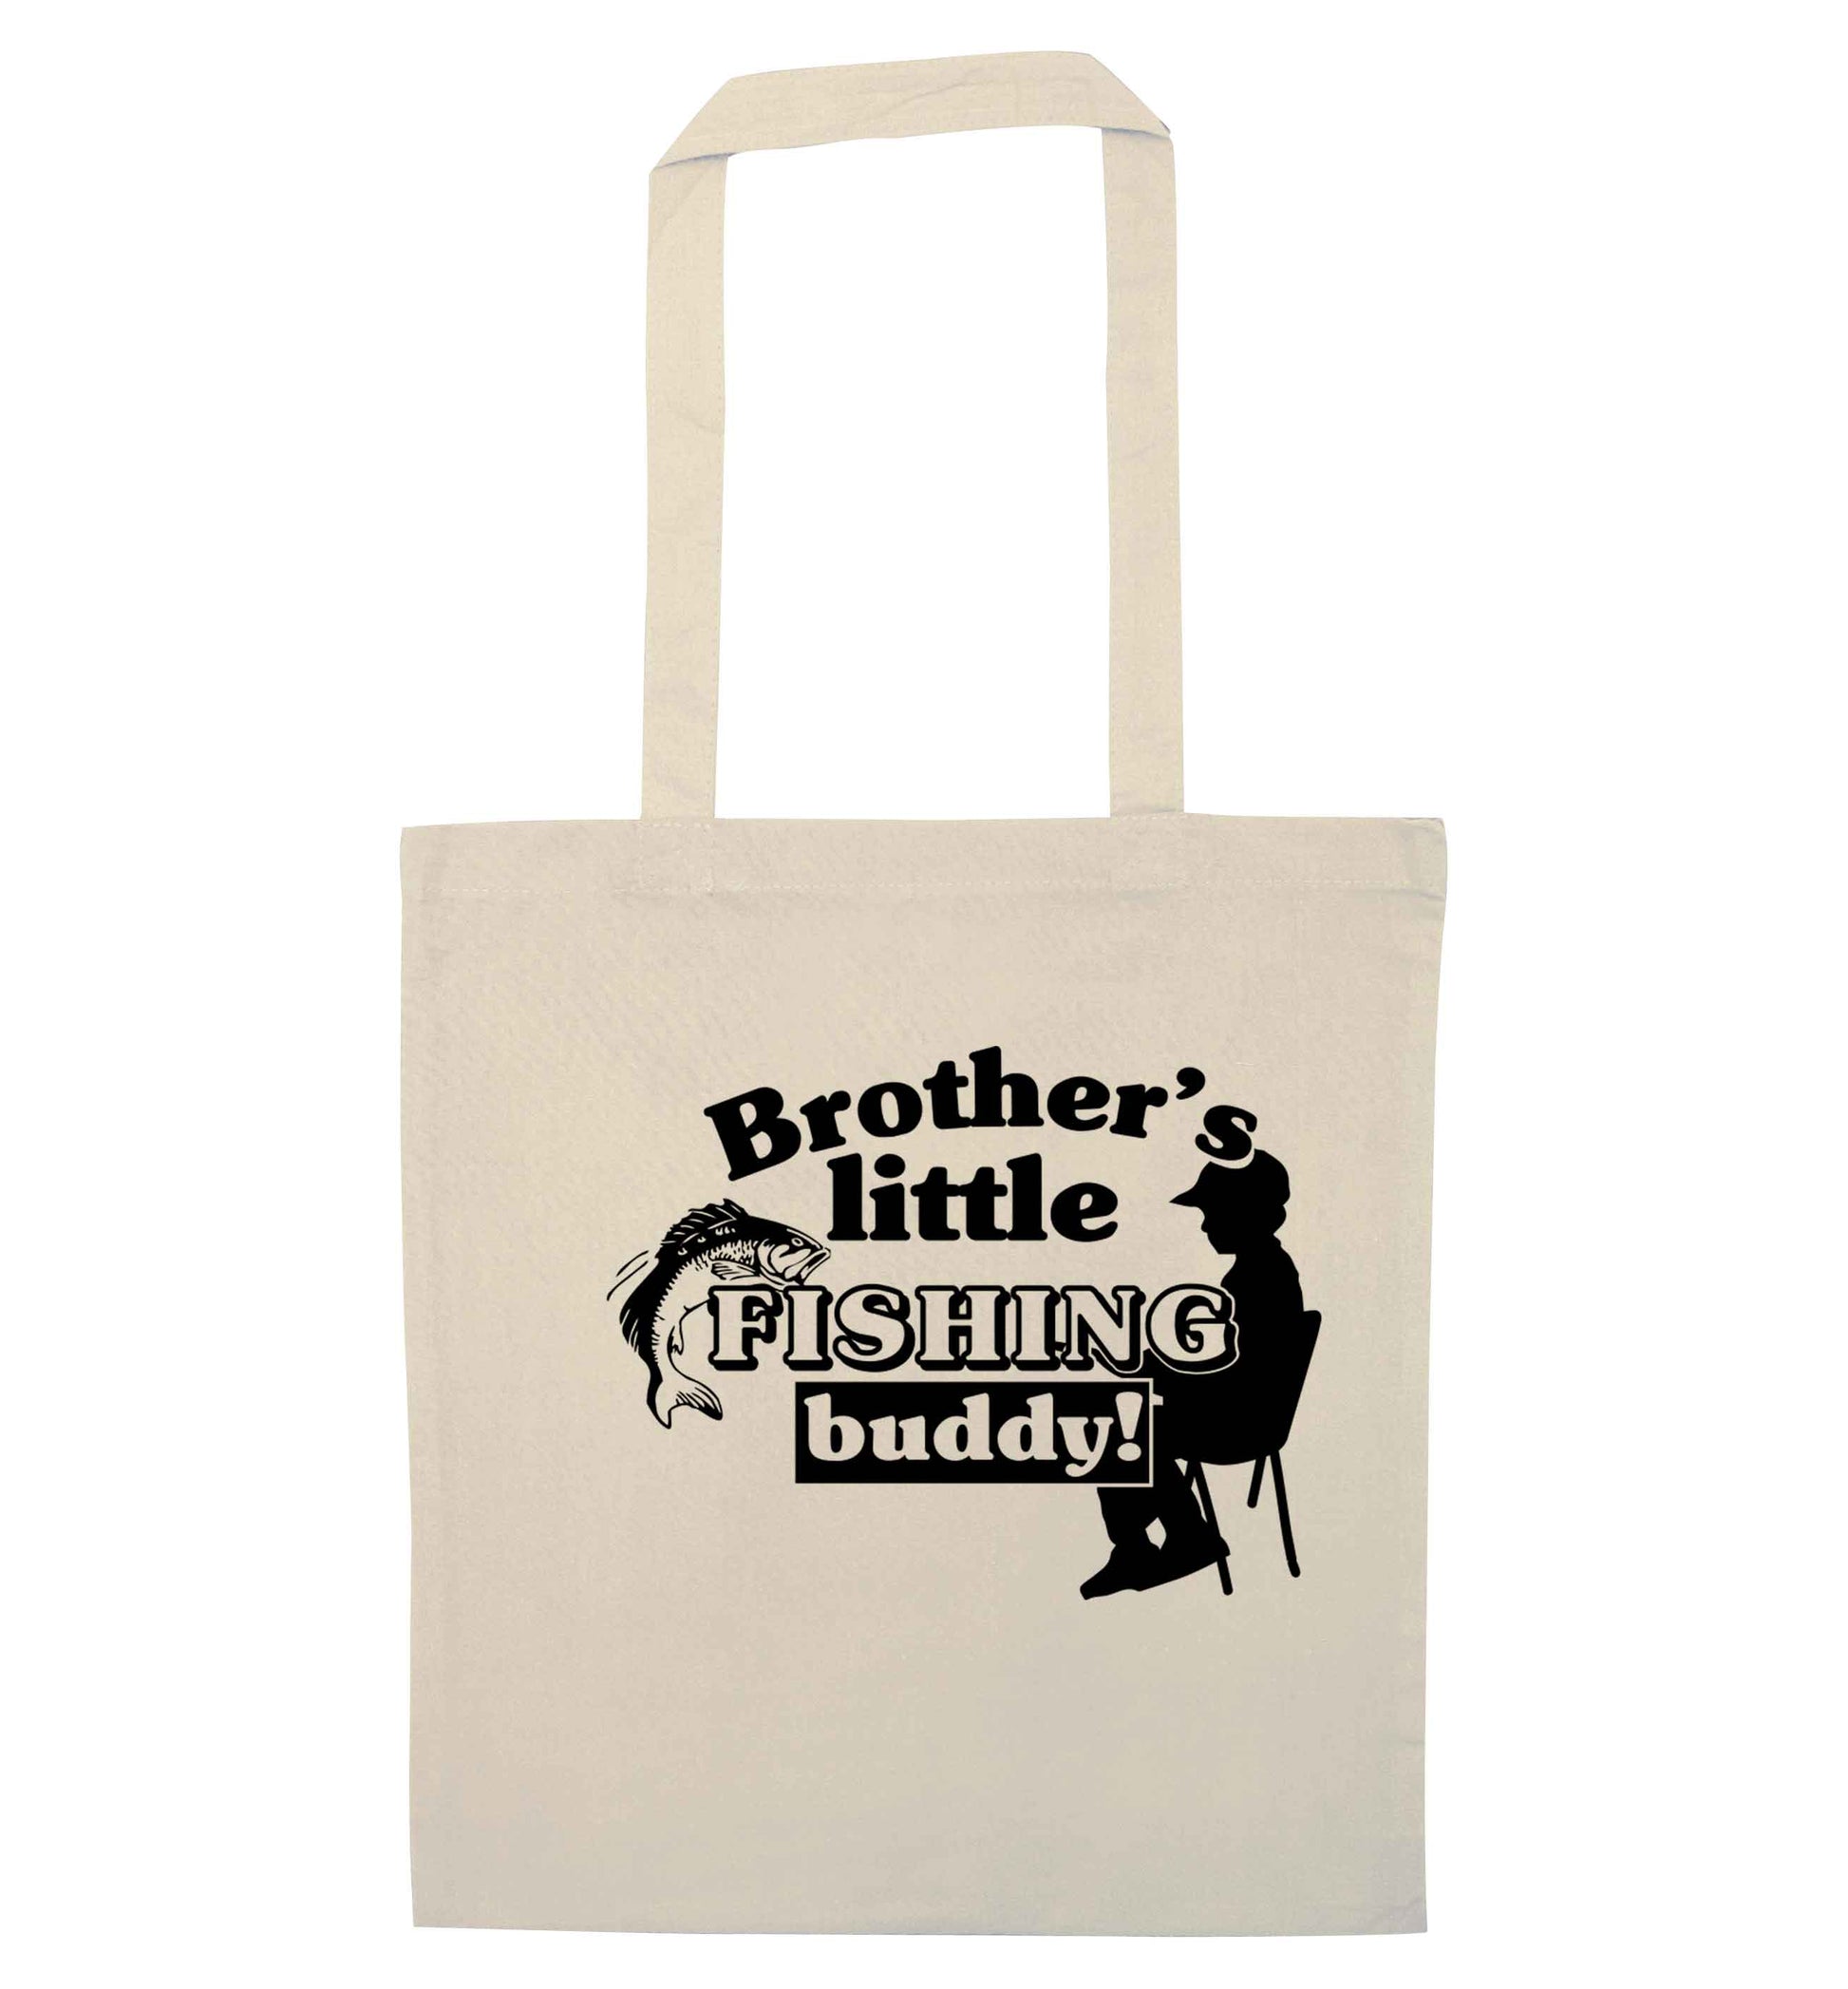 Brother's little fishing buddy natural tote bag